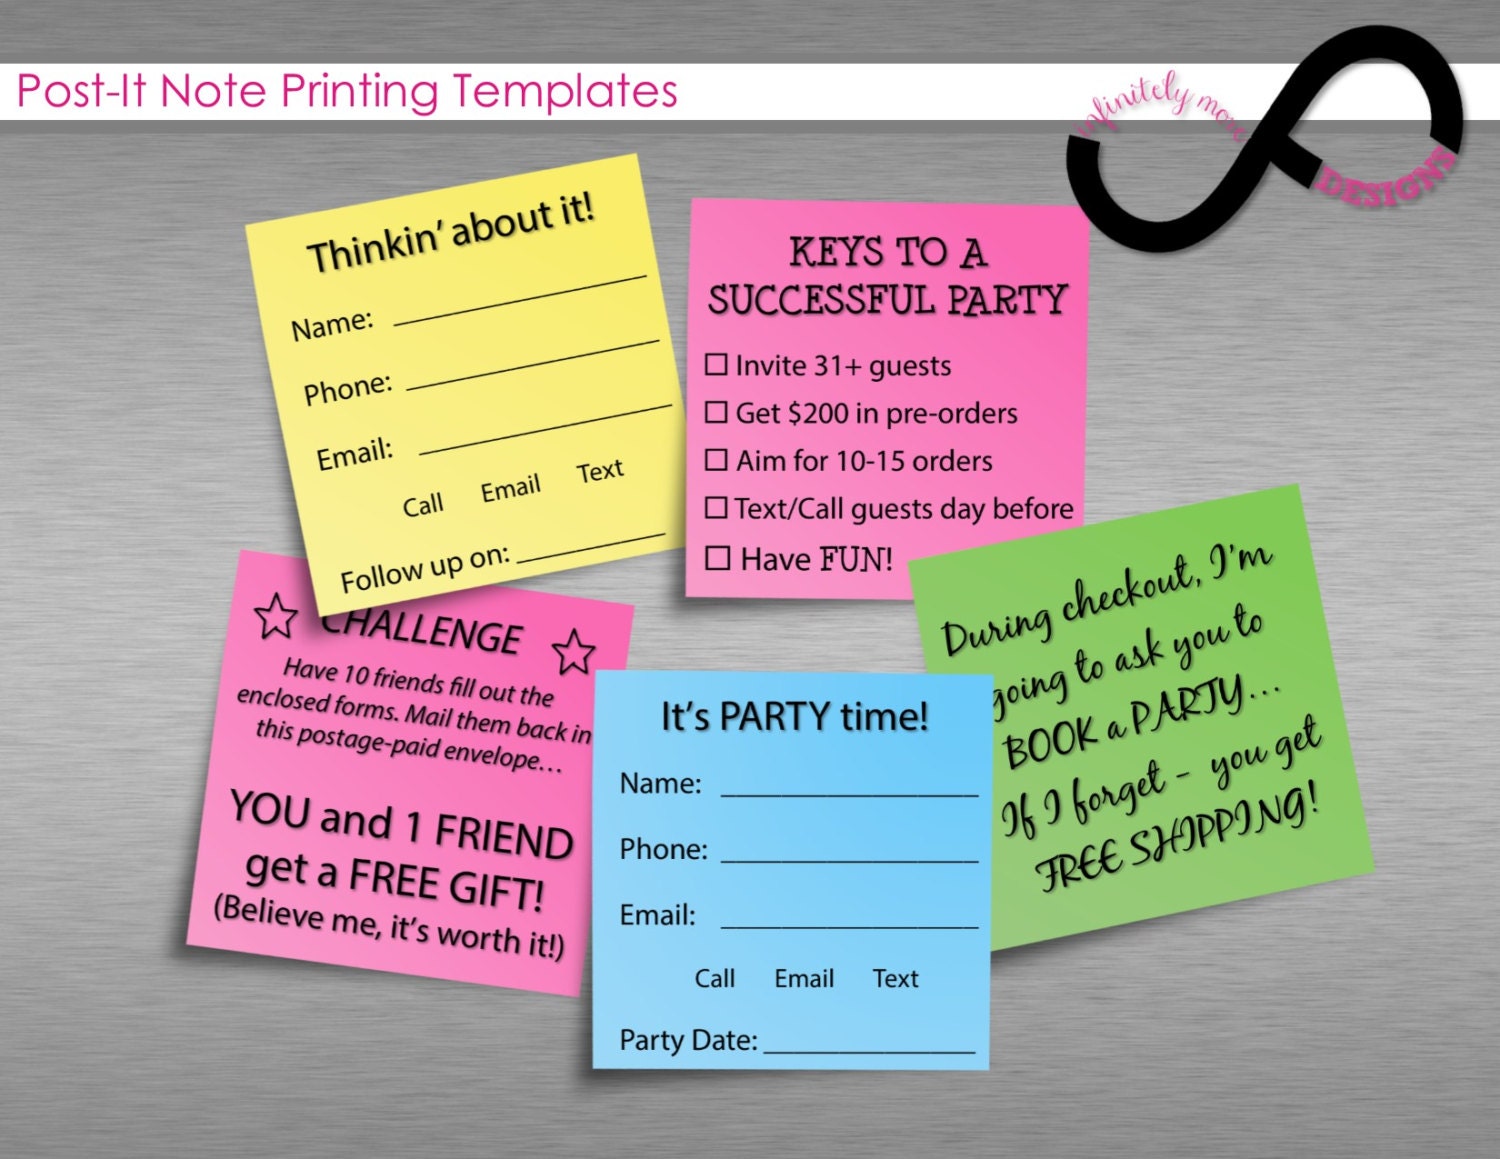 Printing On Sticky Notes Template Sample Design Layout Templates